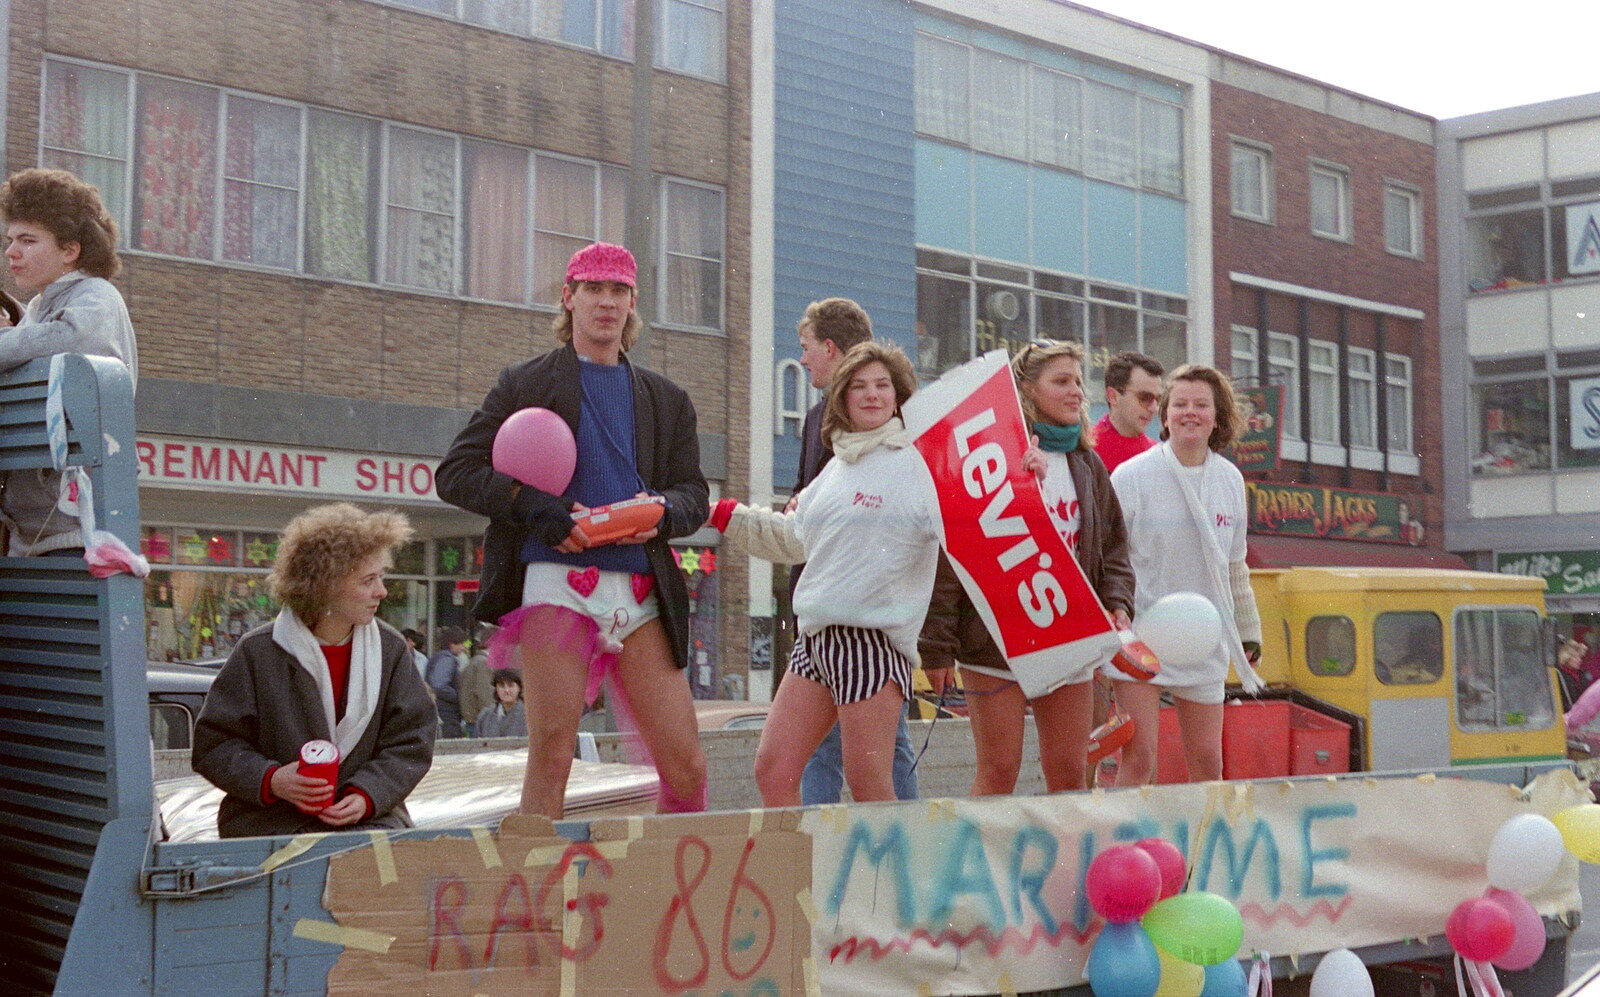 Maritime Halls of Residence float from Uni: PPSU "Jazz" RAG Street Parade, Plymouth, Devon - 17th February 1986